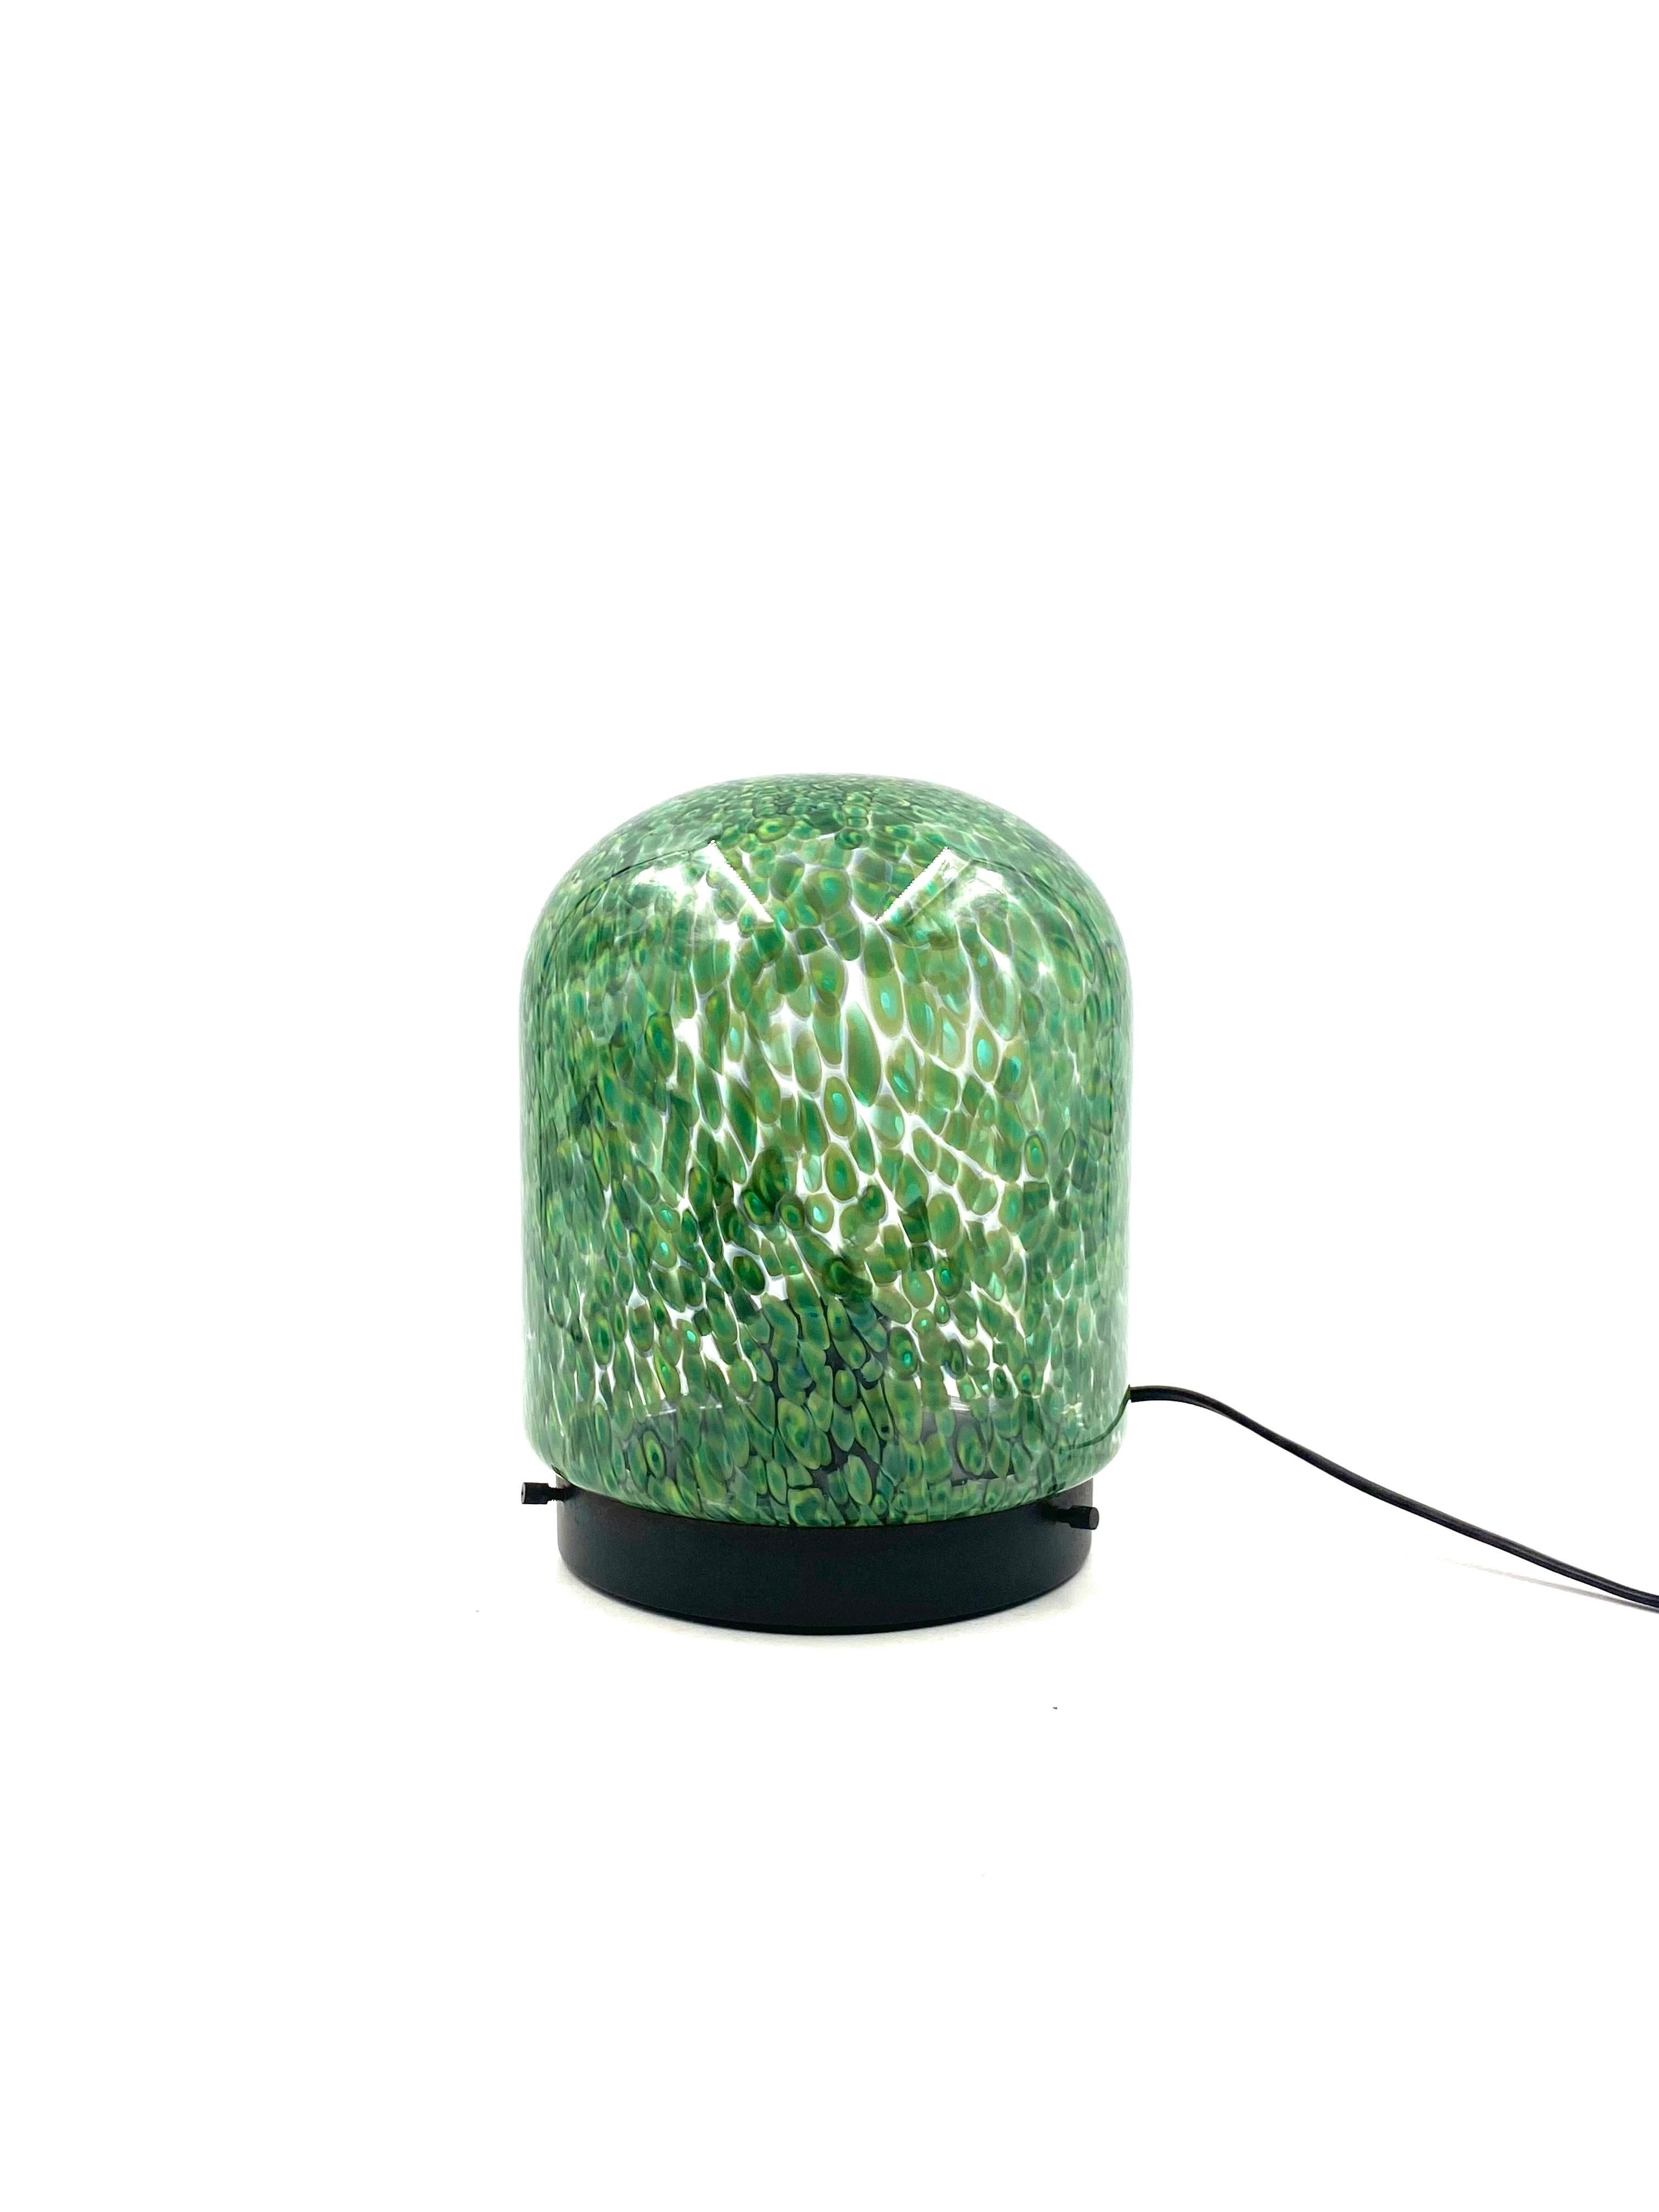 'Neverrino' series green murrine-blown glass table lamp designed by Gae Aulenti.

Vetreria Vistosi Italy 1970s

25 cm H / 20 cm diam.

Conditions: excellent, no defects. In working conditions.